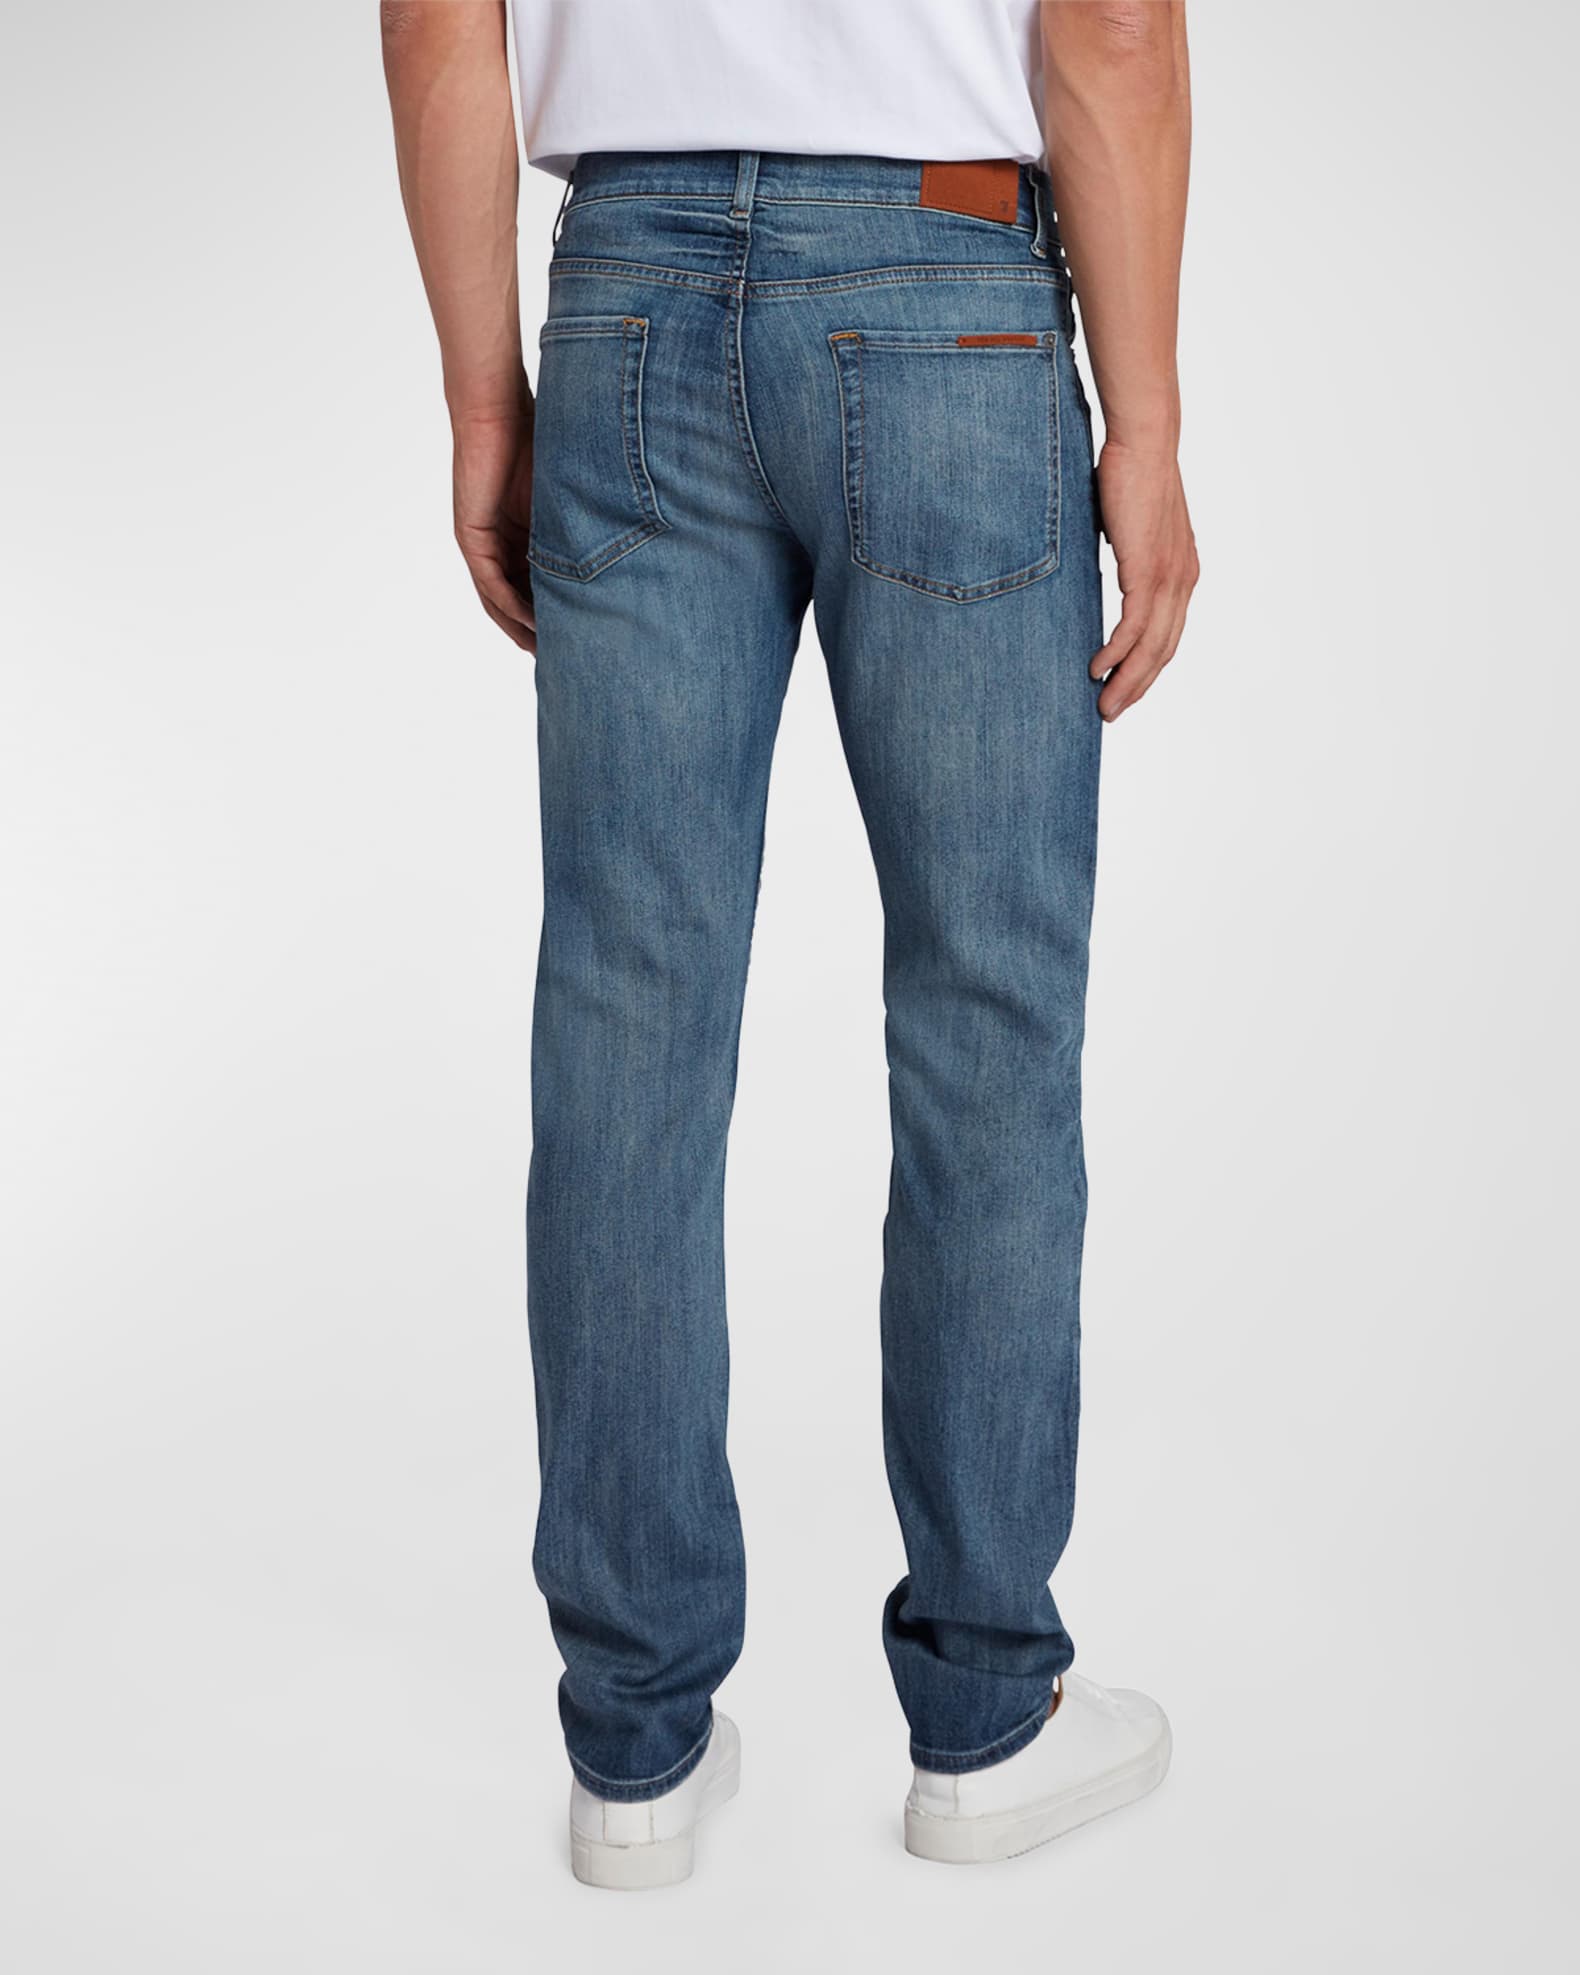 7 for all mankind Men's Slimmy Airweft Slim-Straight Jeans | Neiman Marcus